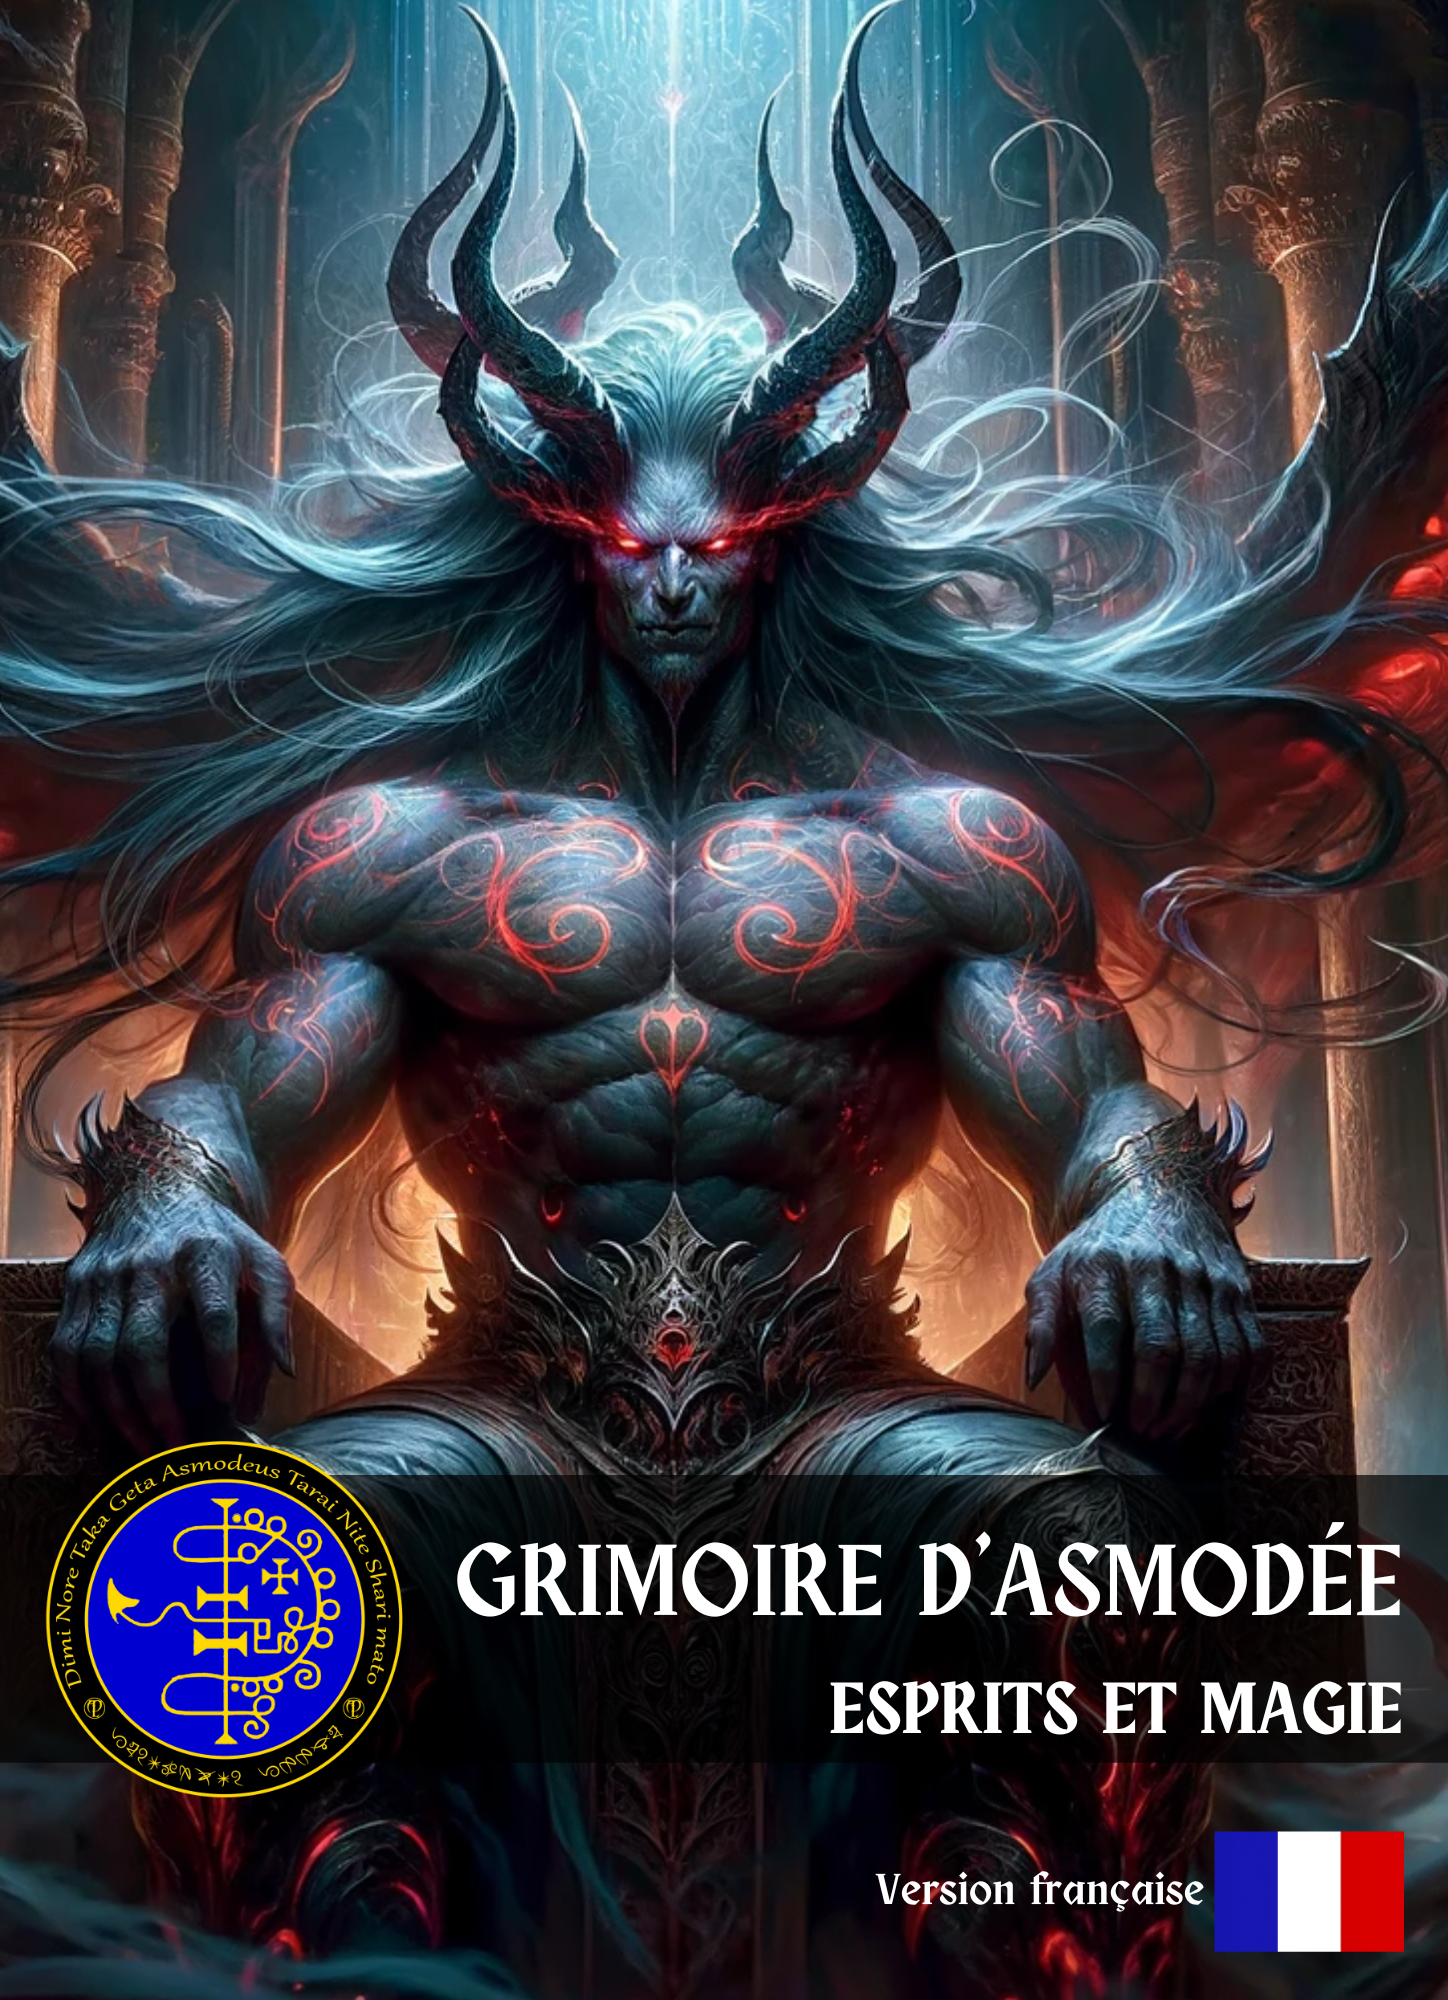 Grimoire of ASMODEUS Spells & Rituals for gambling, luck, worldly pleasures and to Empower Yourself - Abraxas Amulets ® Magic ♾️ Talismans ♾️ Initiations